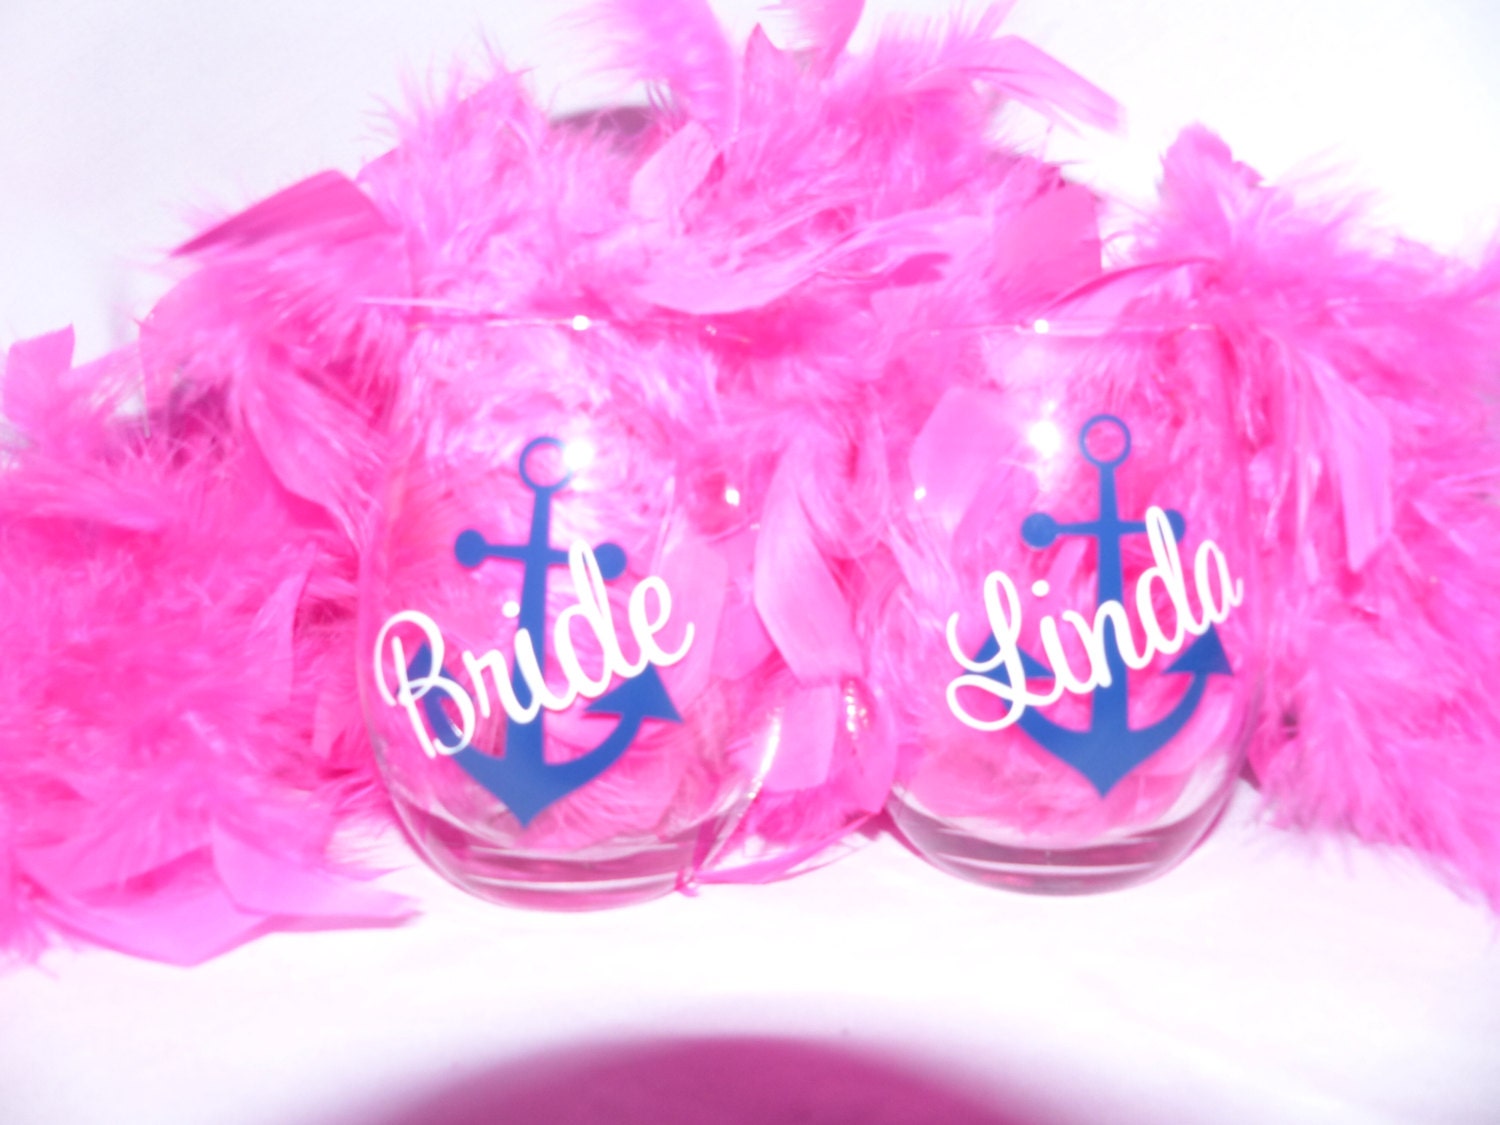 Personalized Stemless Wine Glass, Wine glass, Anchor Wine glass, monogrammed, Nautical, Lets get Nauti, Bridal party wine glasses,